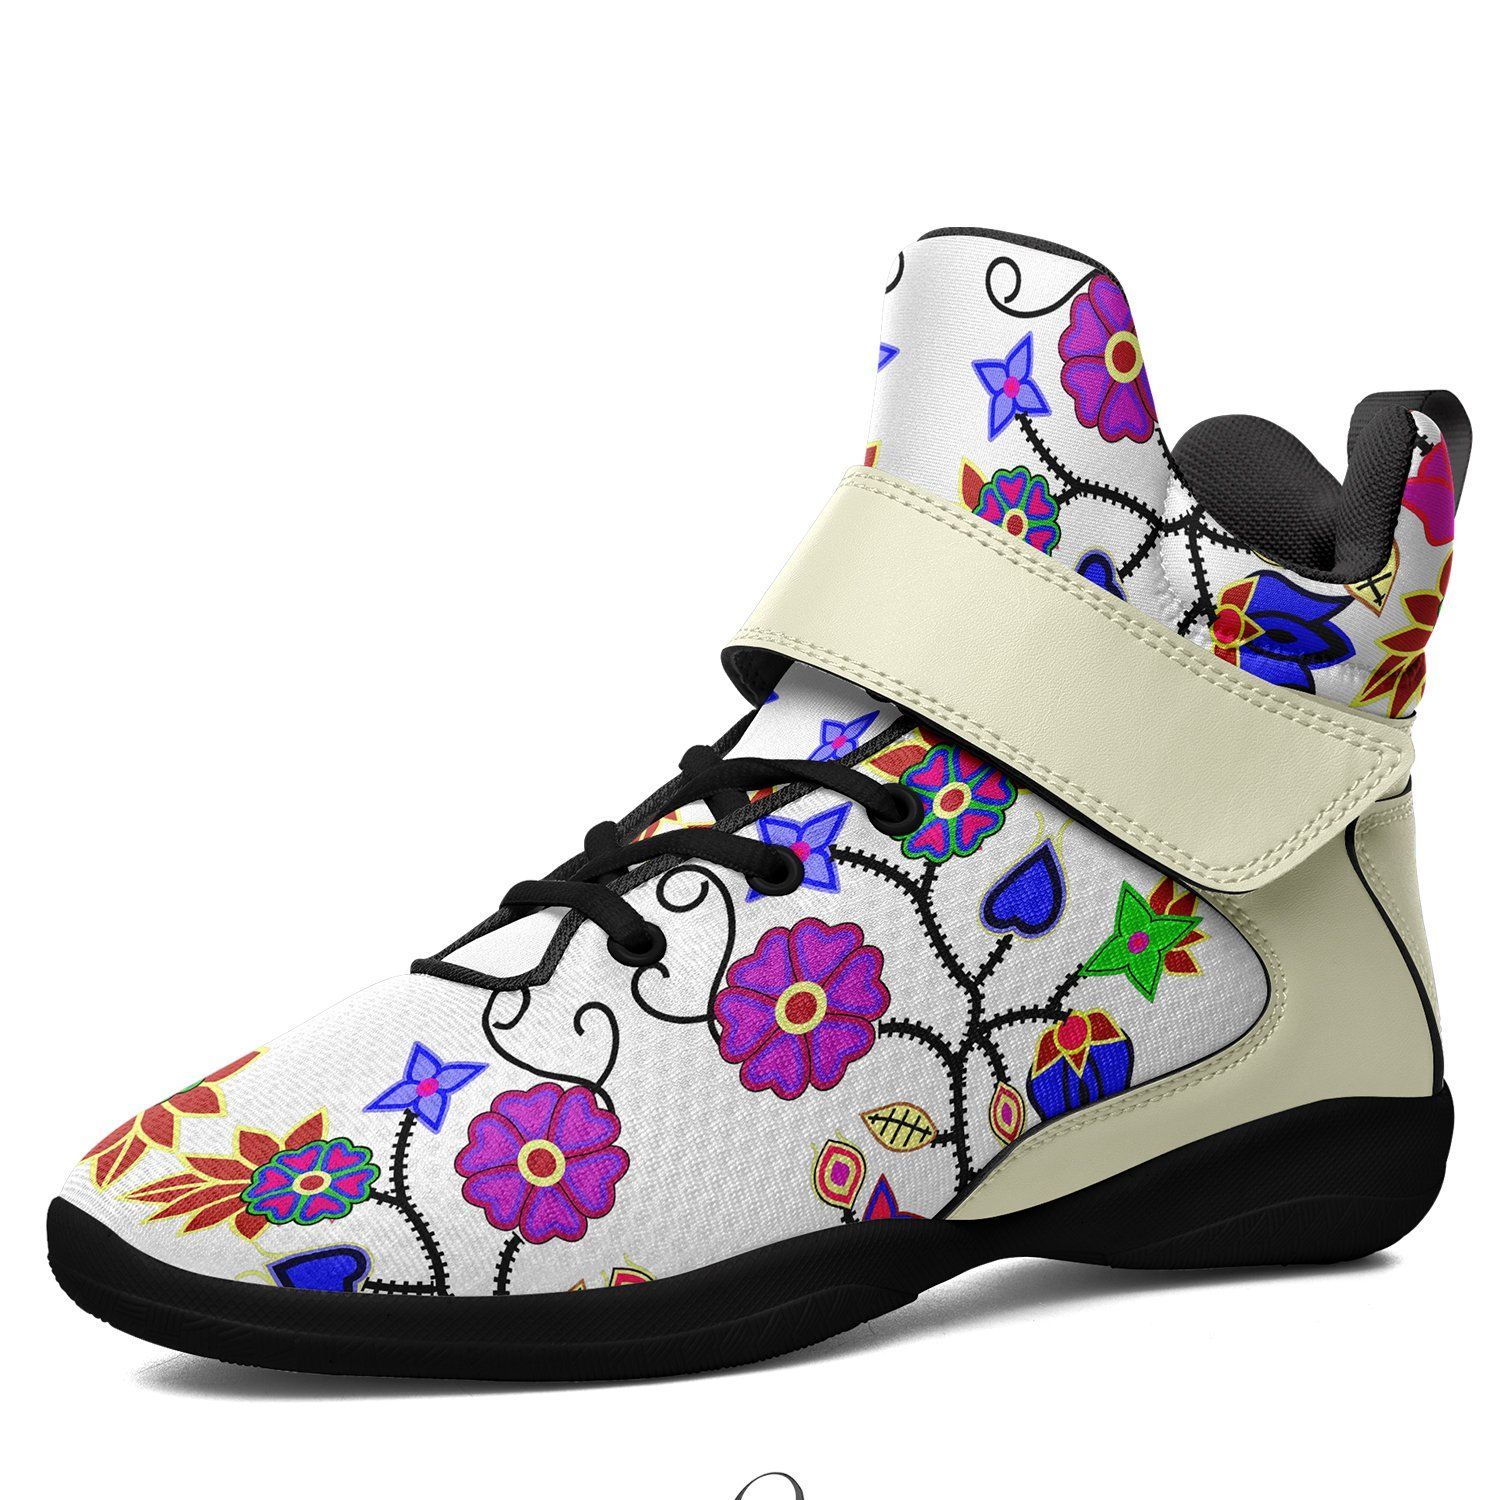 Floral Beadwork Seven Clans White Kid's Ipottaa Basketball / Sport High Top Shoes 49 Dzine US Child 12.5 / EUR 30 Black Sole with Cream Strap 